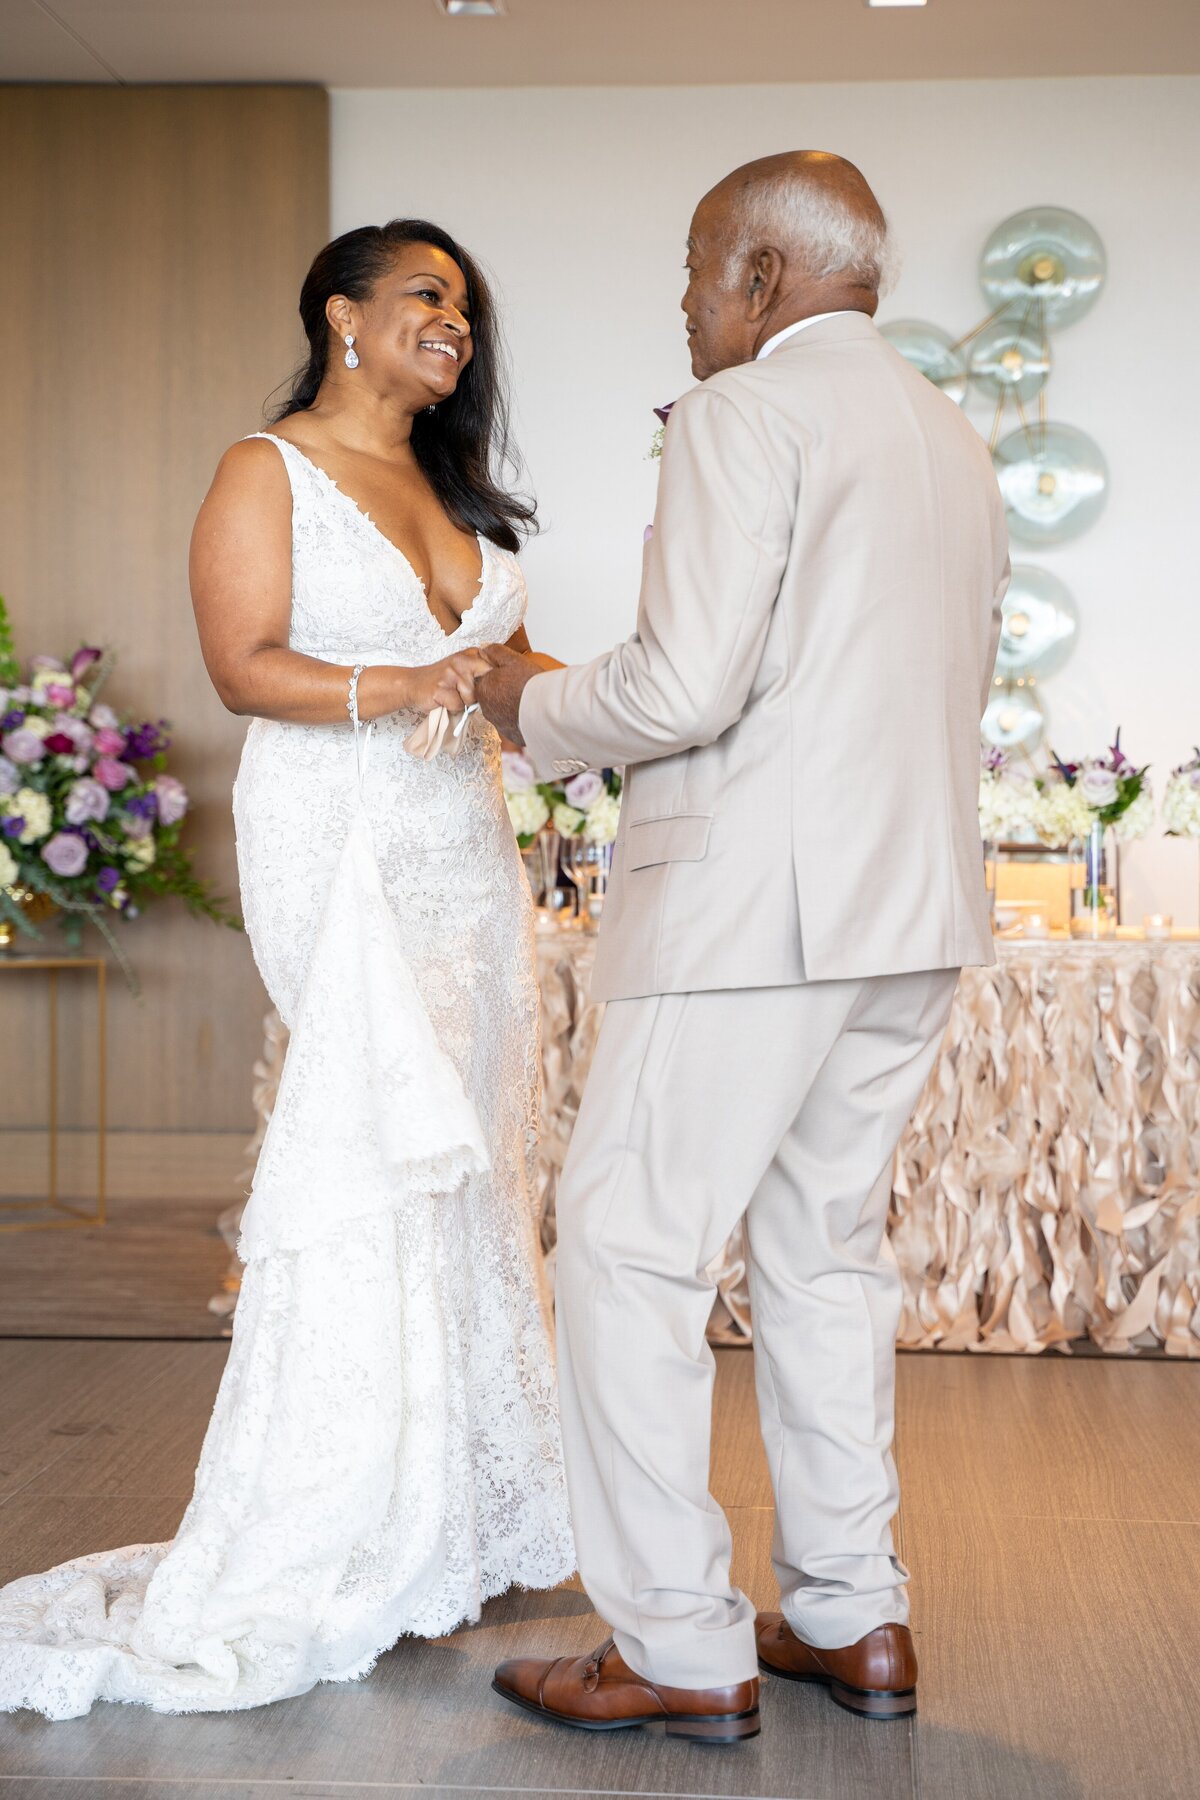 Bride dances with her father at the InterContinental Washington D.C.